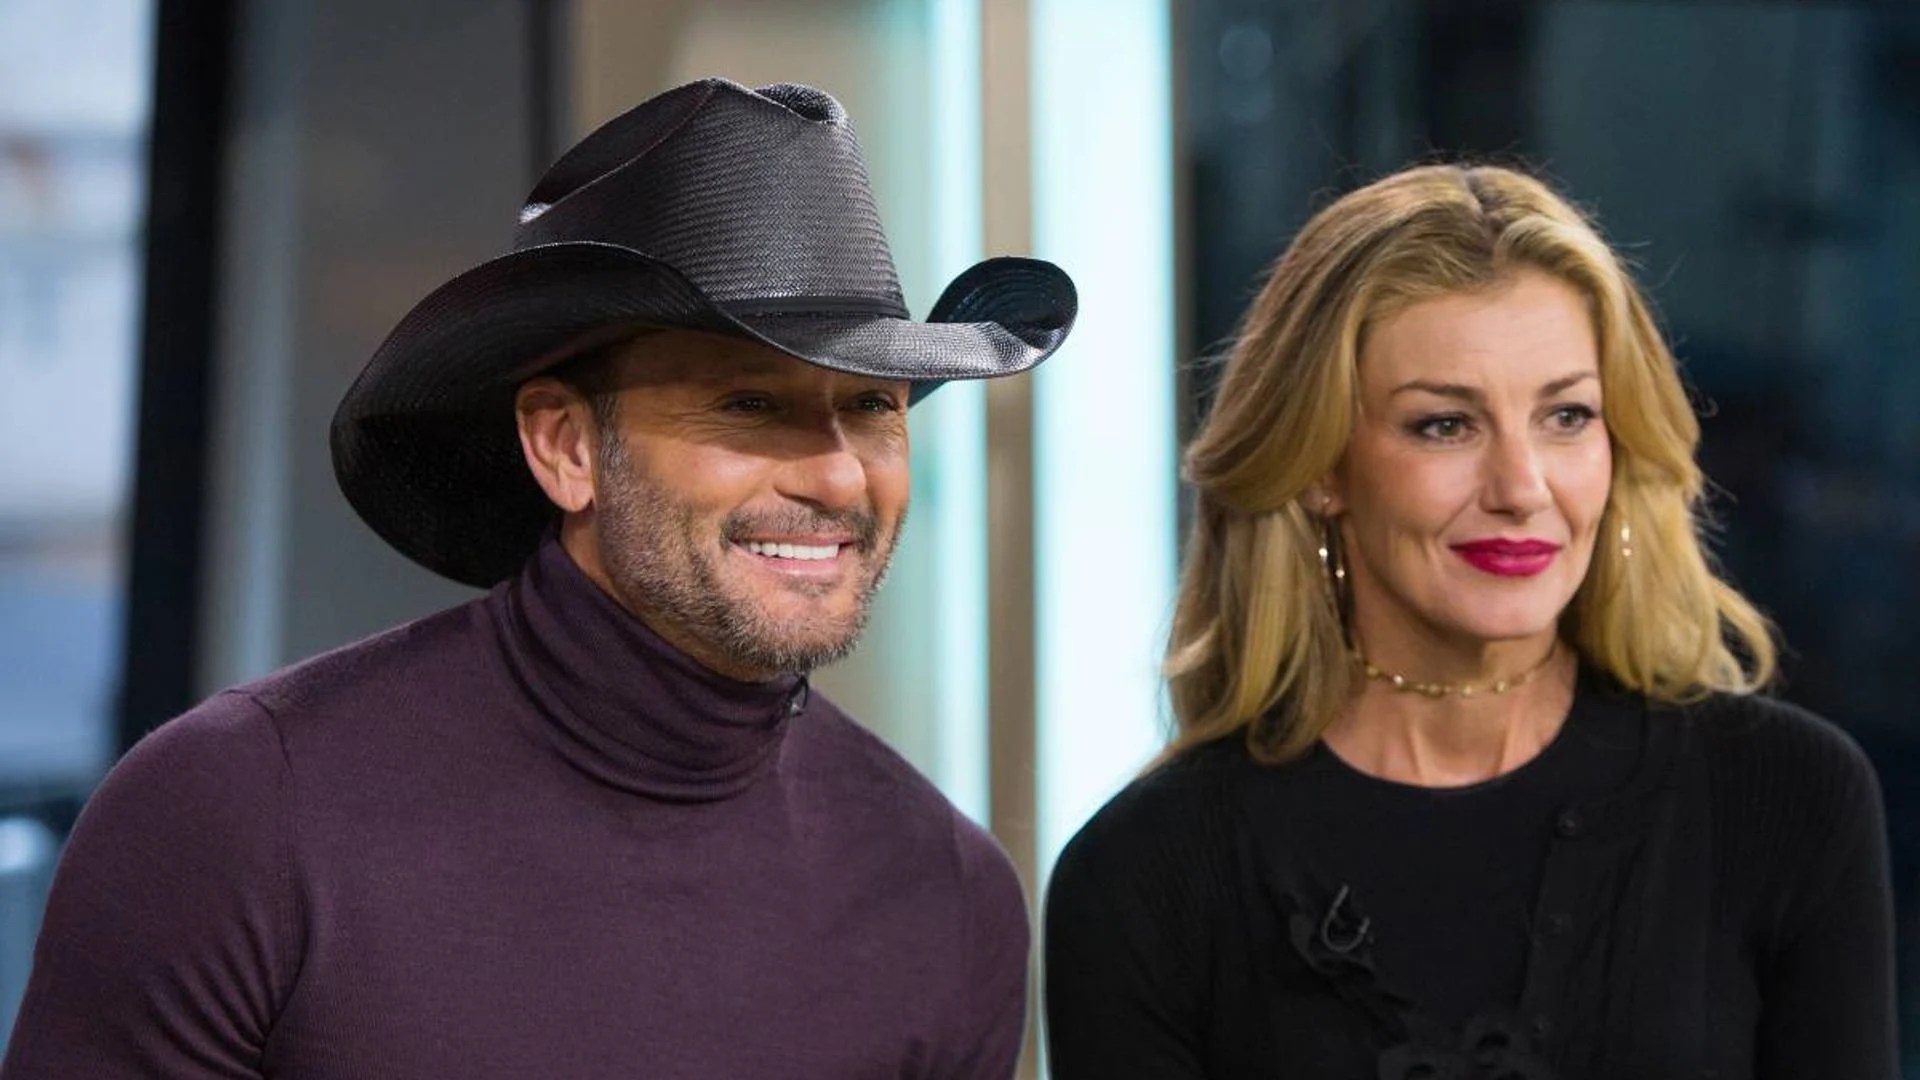 The one thing Faith Hill's first husband revealed as causing the